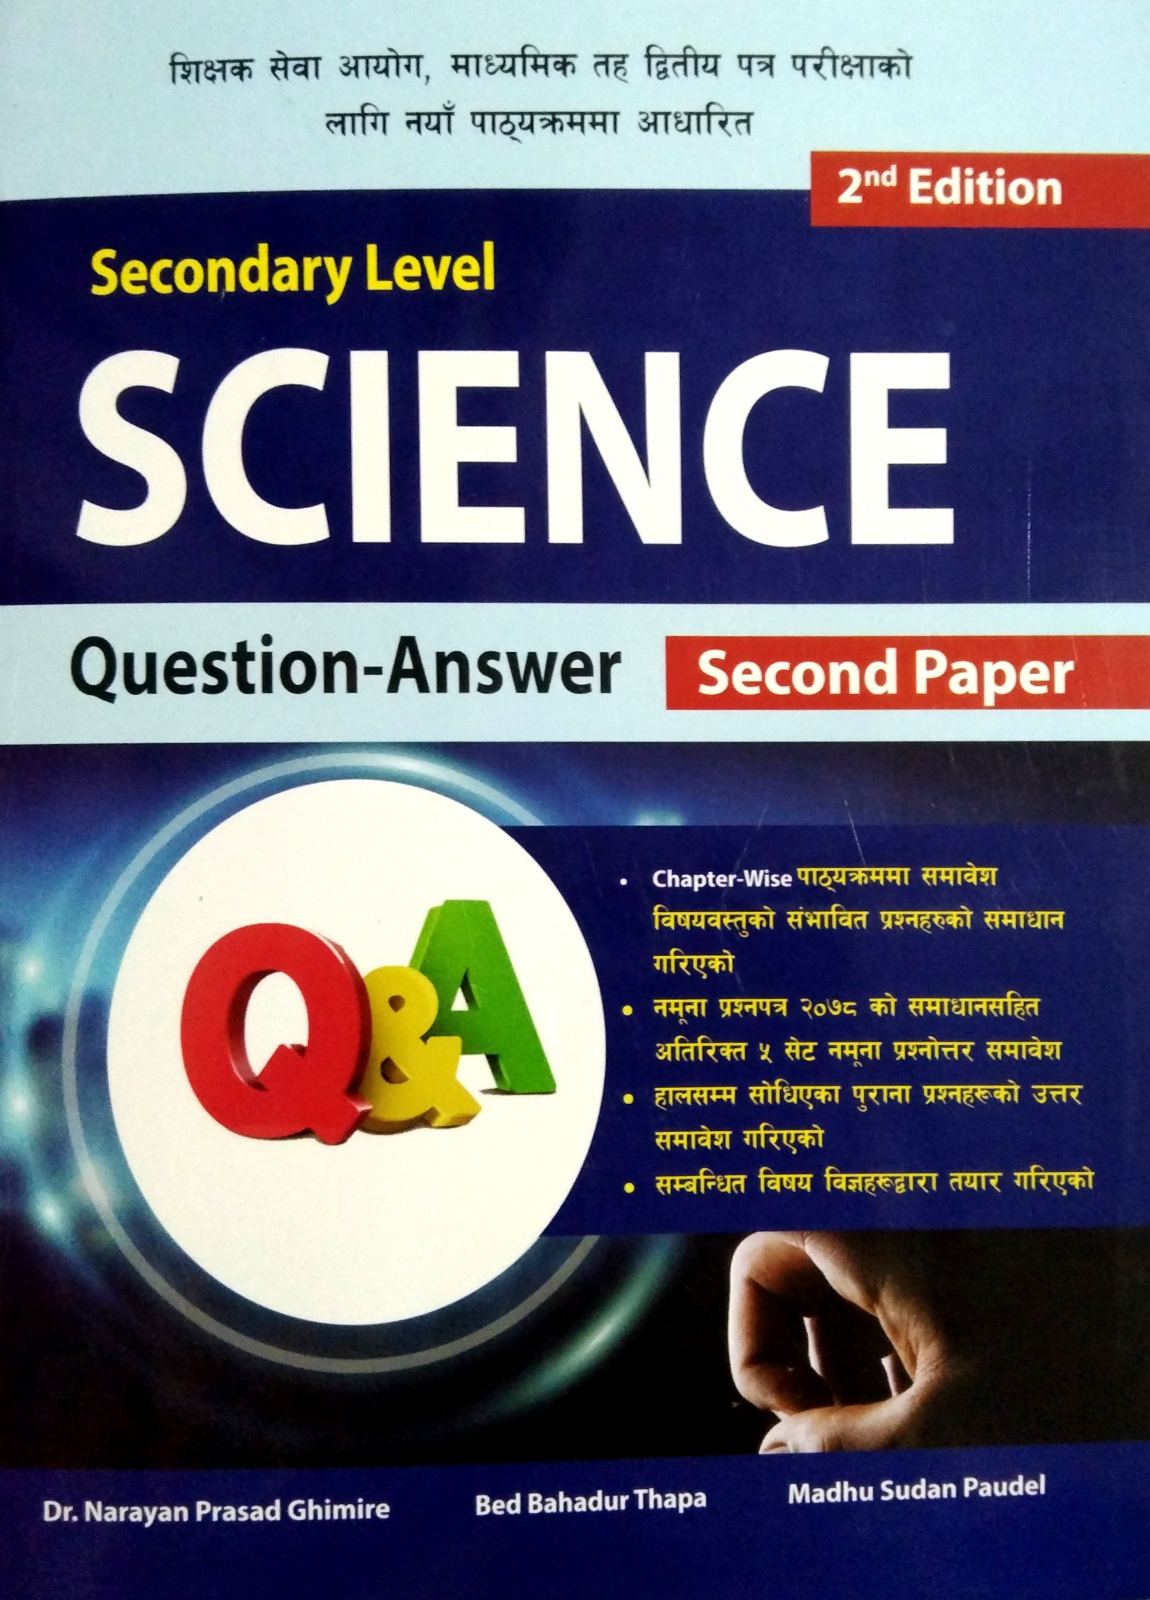 Secondary Level Science - Second Paper